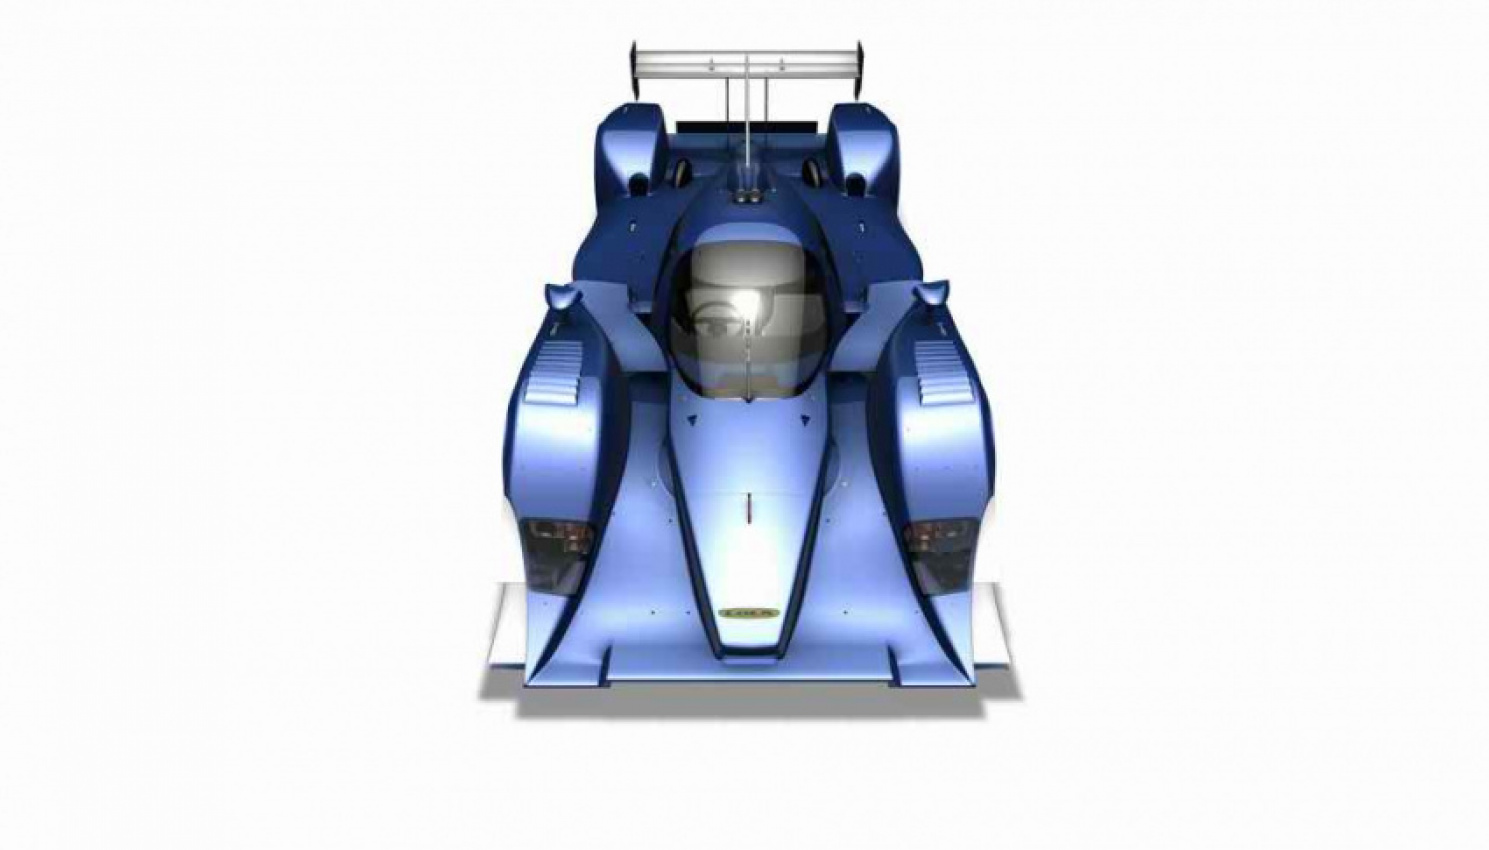 autos, cars, review, 2010s cars, lola, lola race car, lola race car in depth, motorsport, race car, race car in depth, 2011 lola b11/80 lmp2 coupe